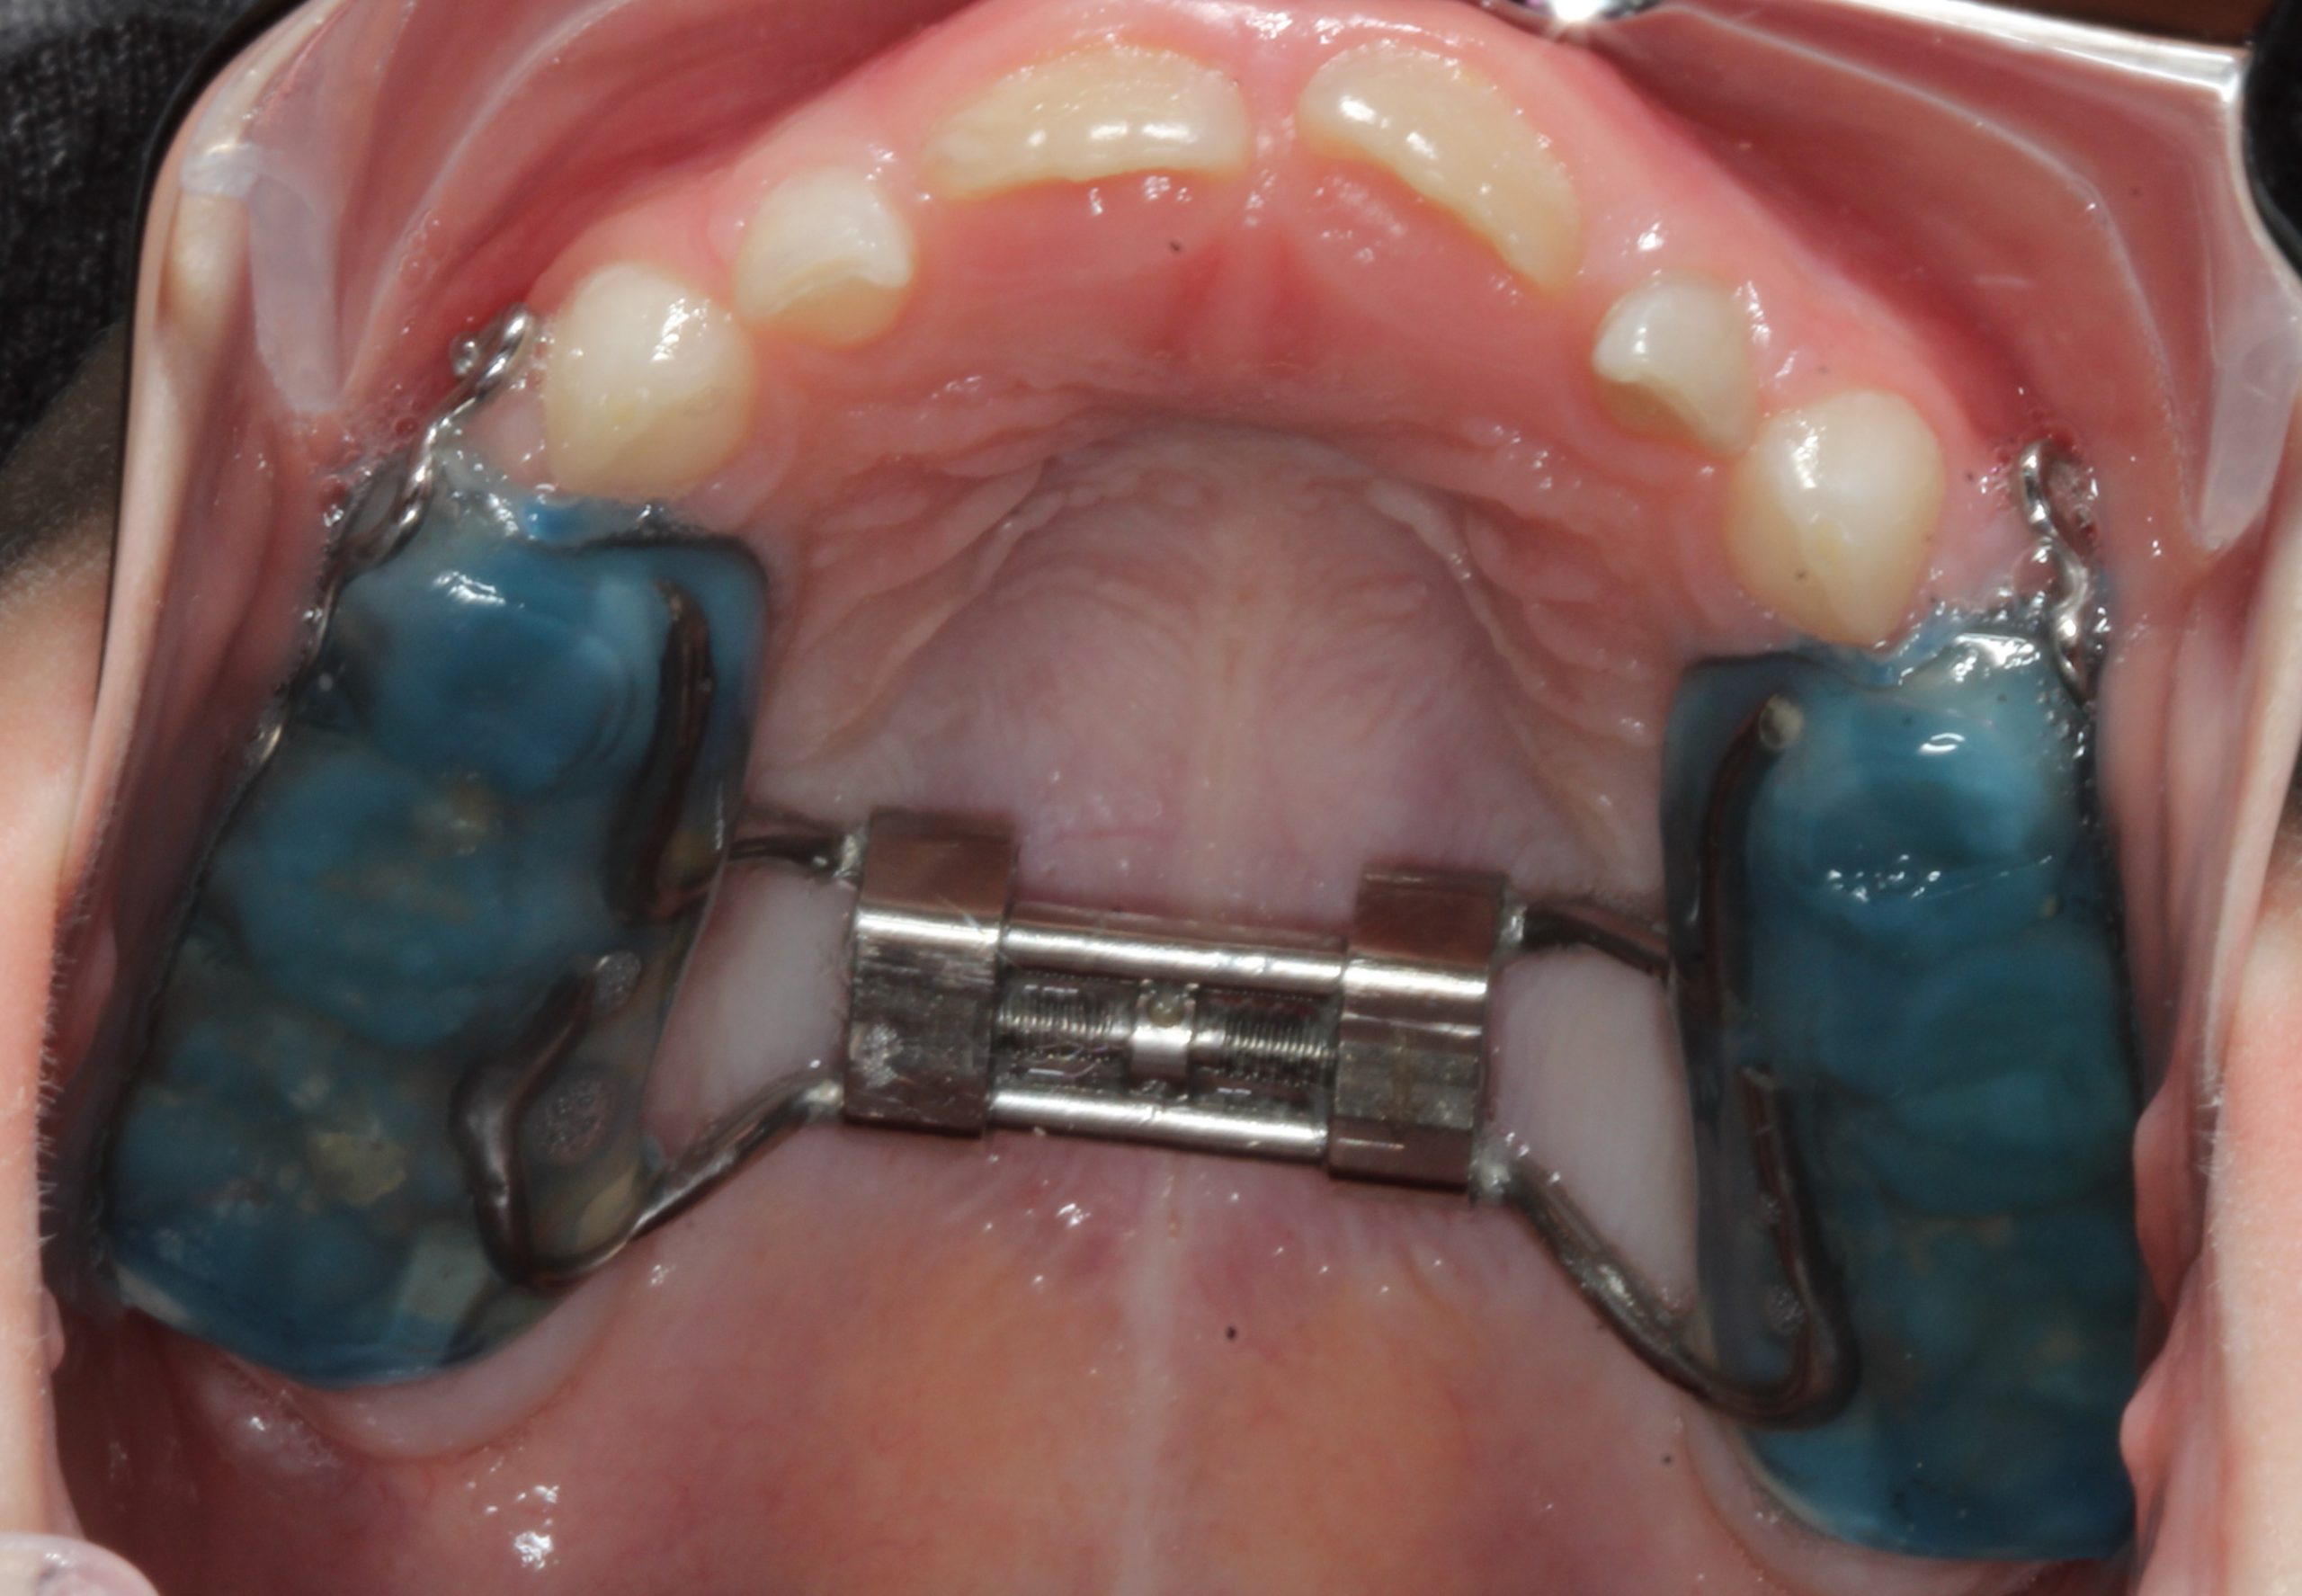 Everything You Need to Know About Palatal Expanders in